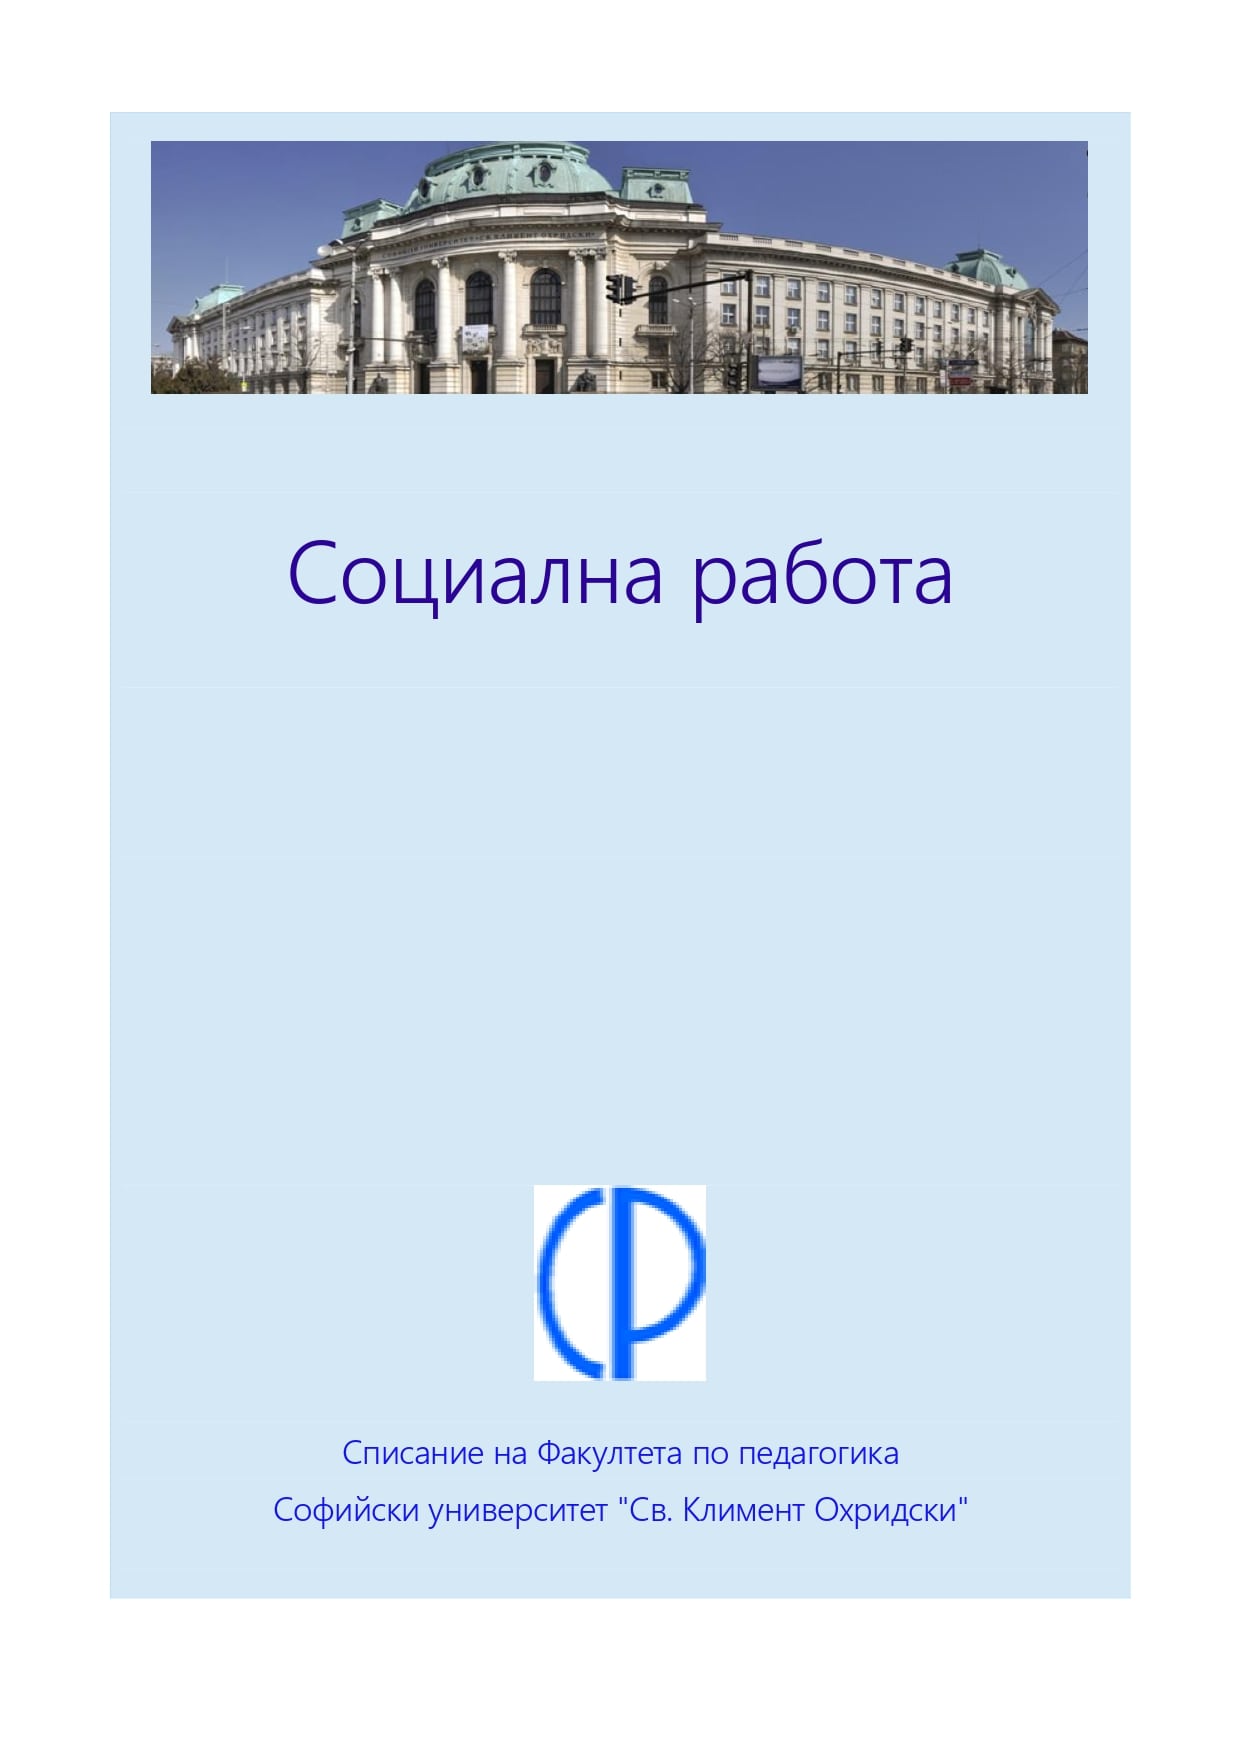 Challenges in policies for children in Bulgaria's first "White paper on the child" Cover Image